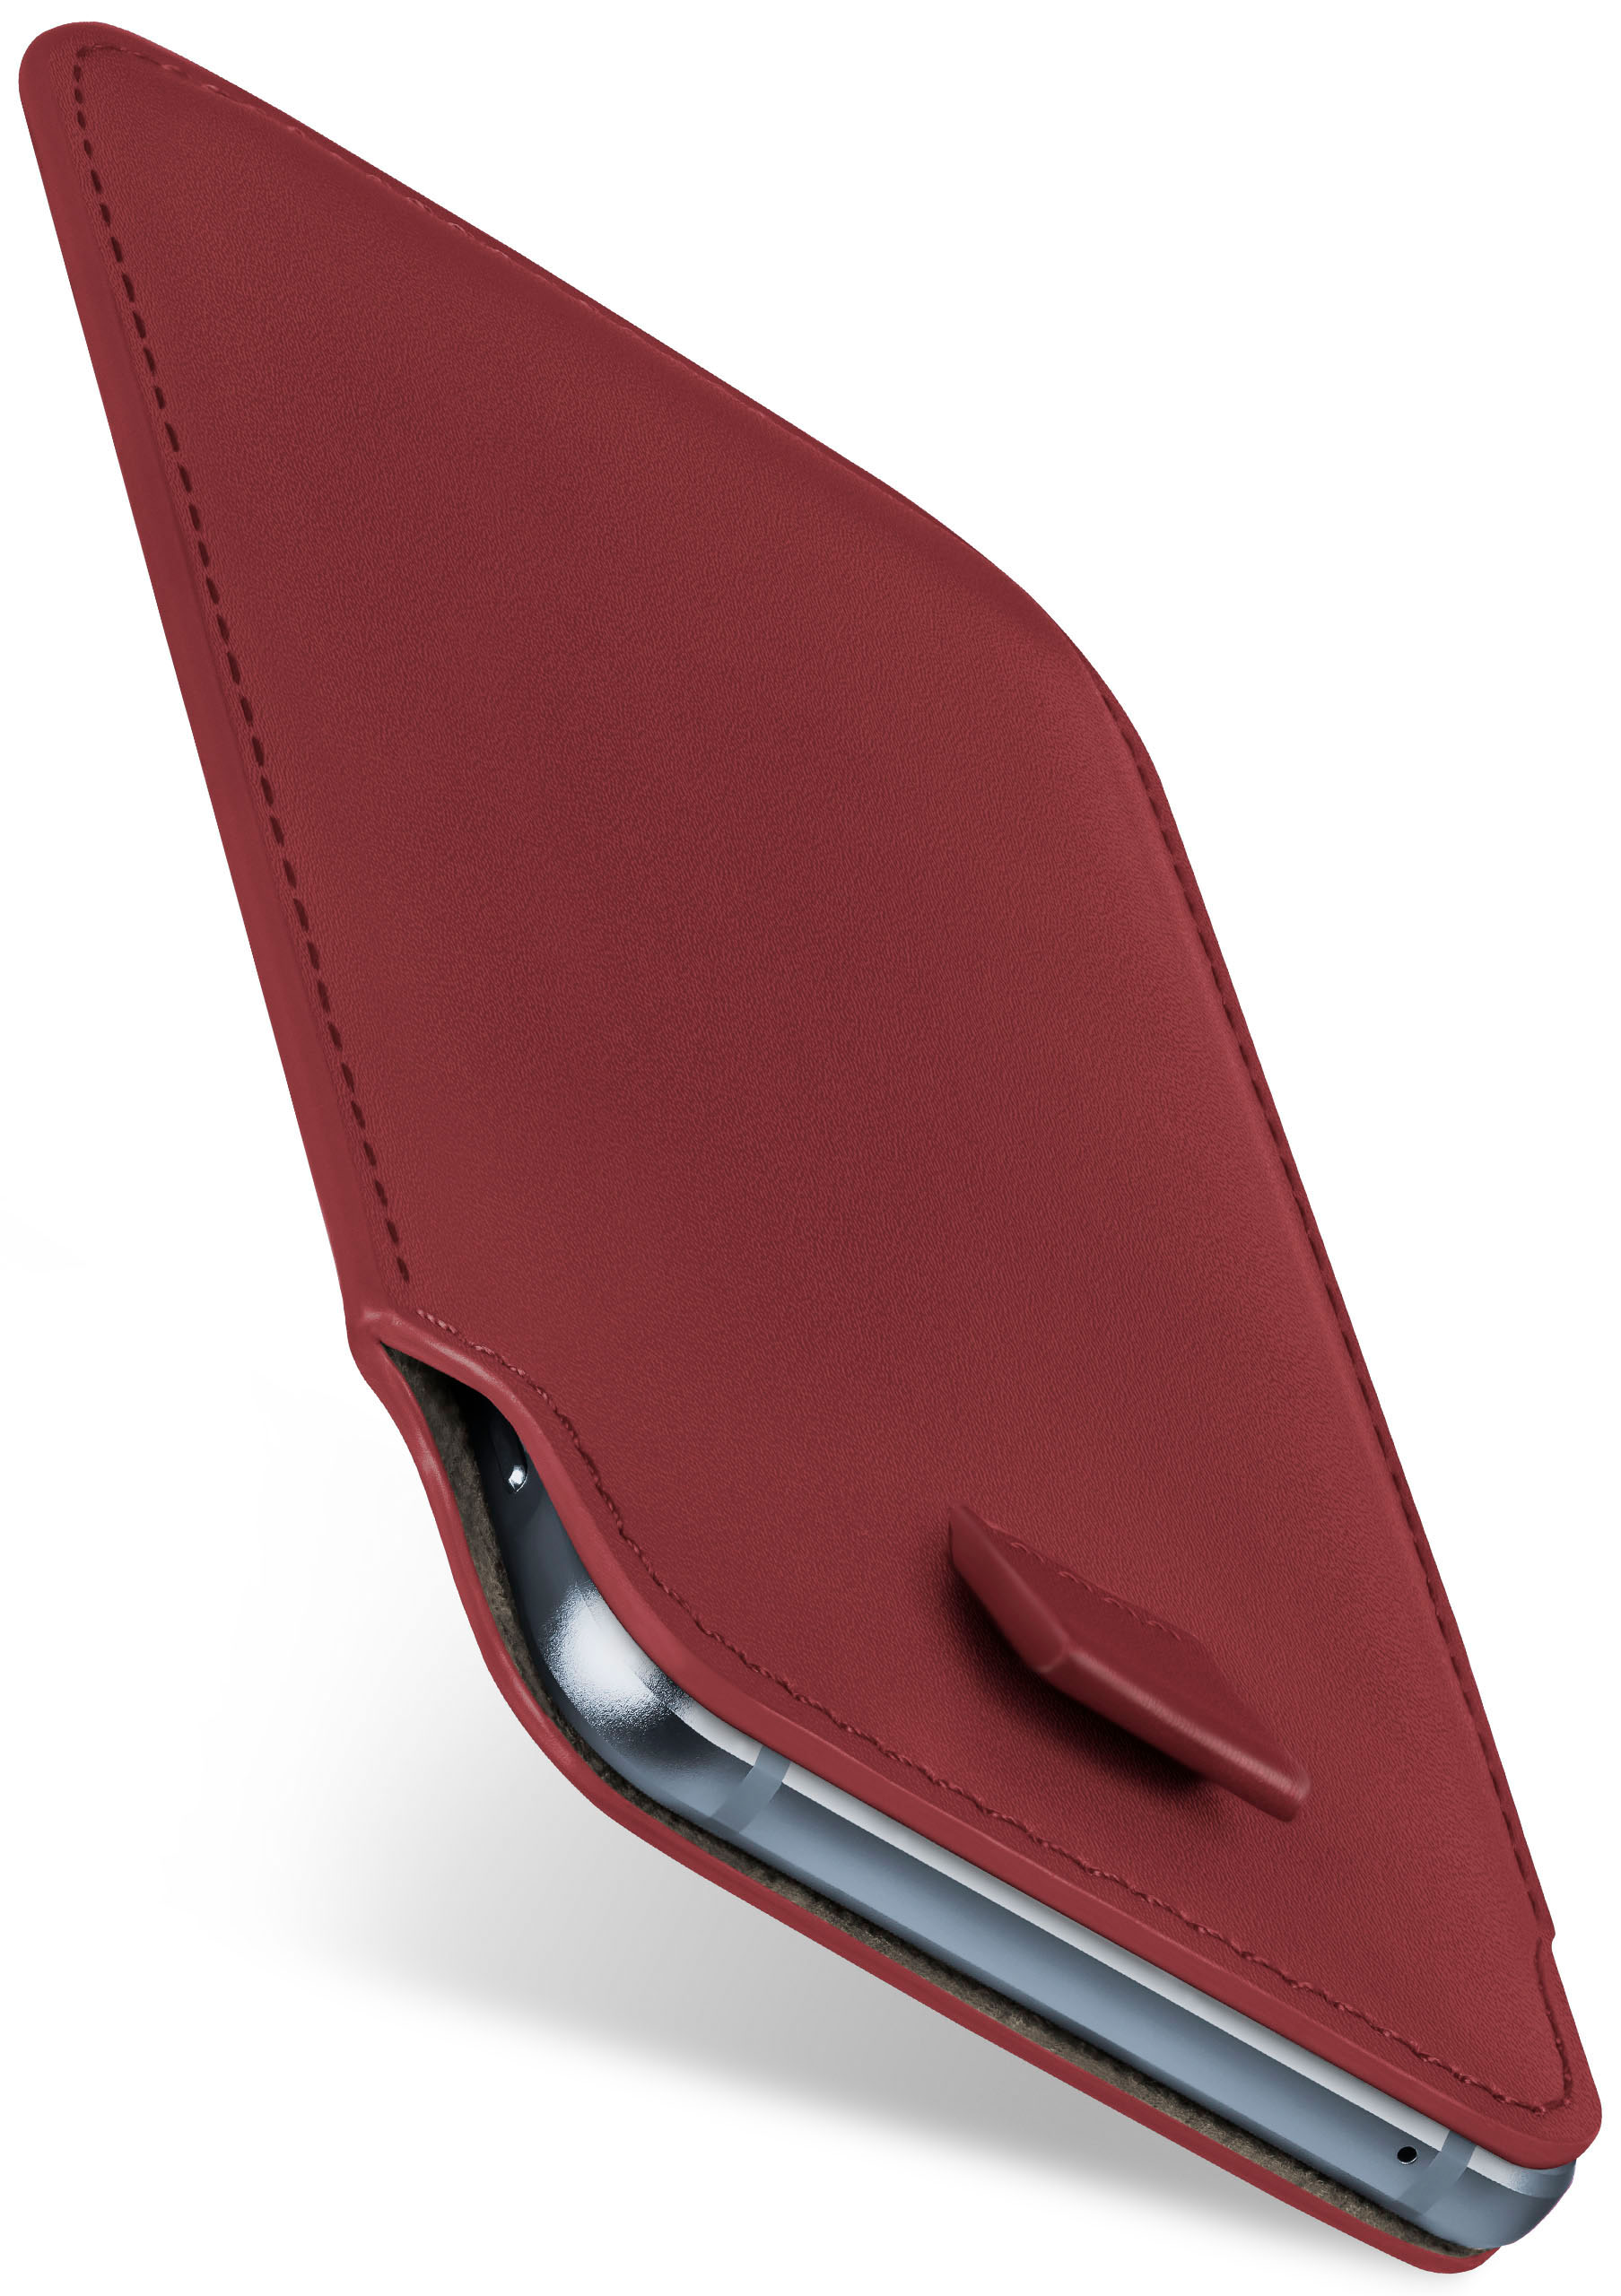 Arc Sony, S, Ericsson Cover, Case, Slide Full Xperia MOEX Maroon-Red